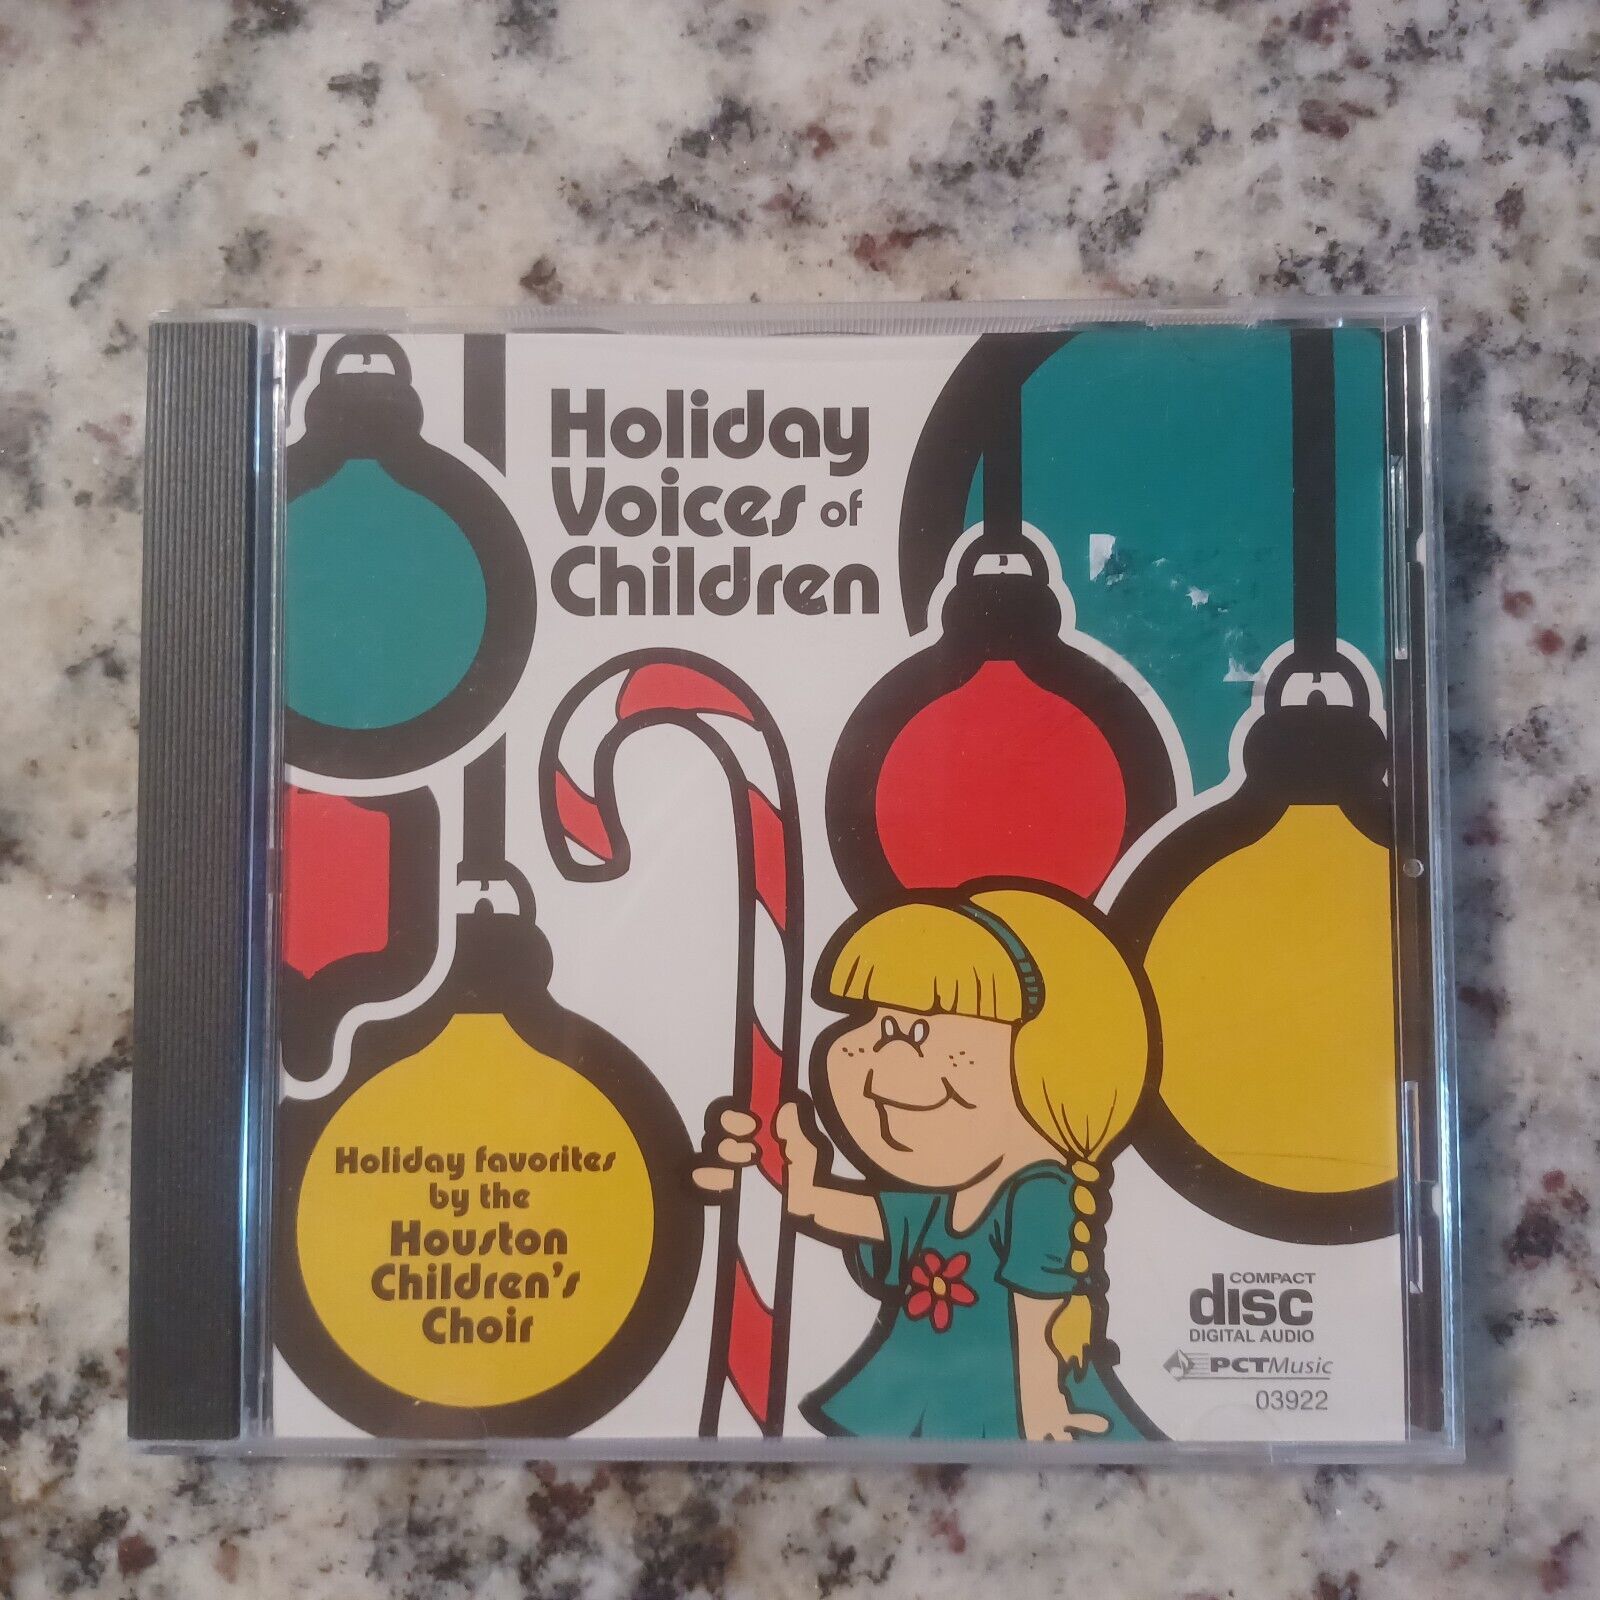 Holiday Voices of Children - Houston Choir (CD, 2006, PC Treasures Music)